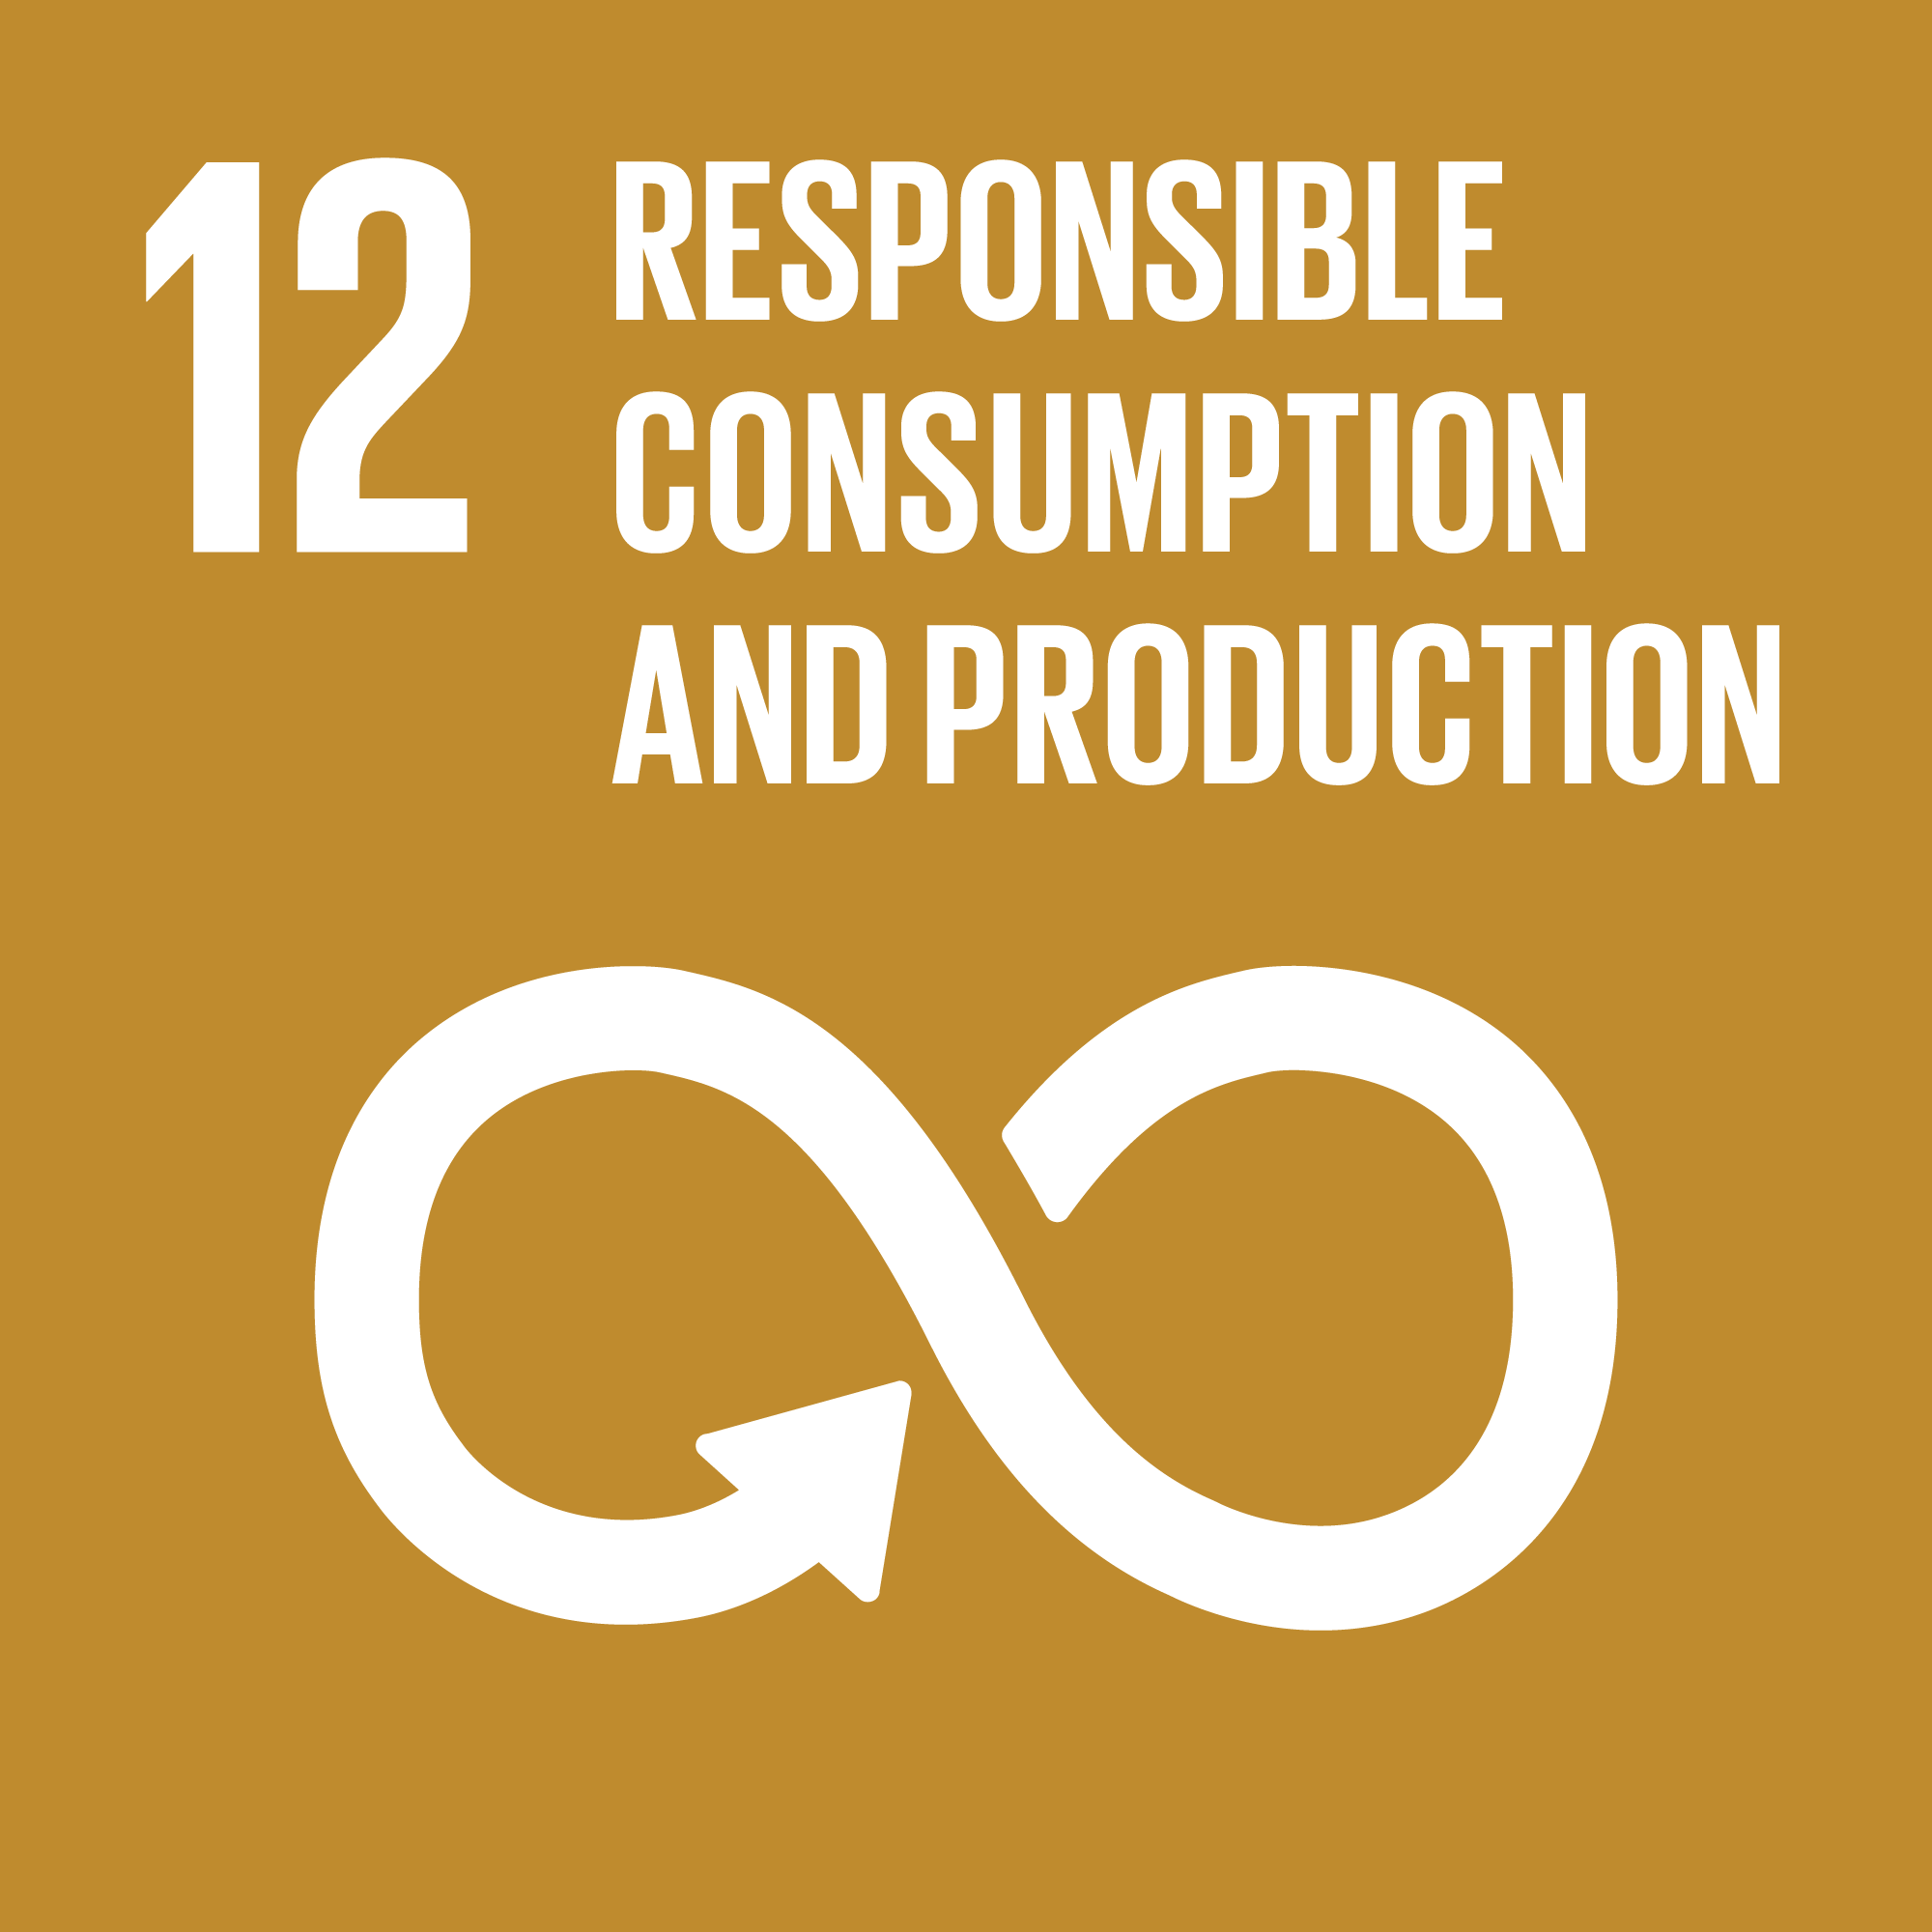 Go to https://www.globalgoals.org/12-responsible-consumption-and-production